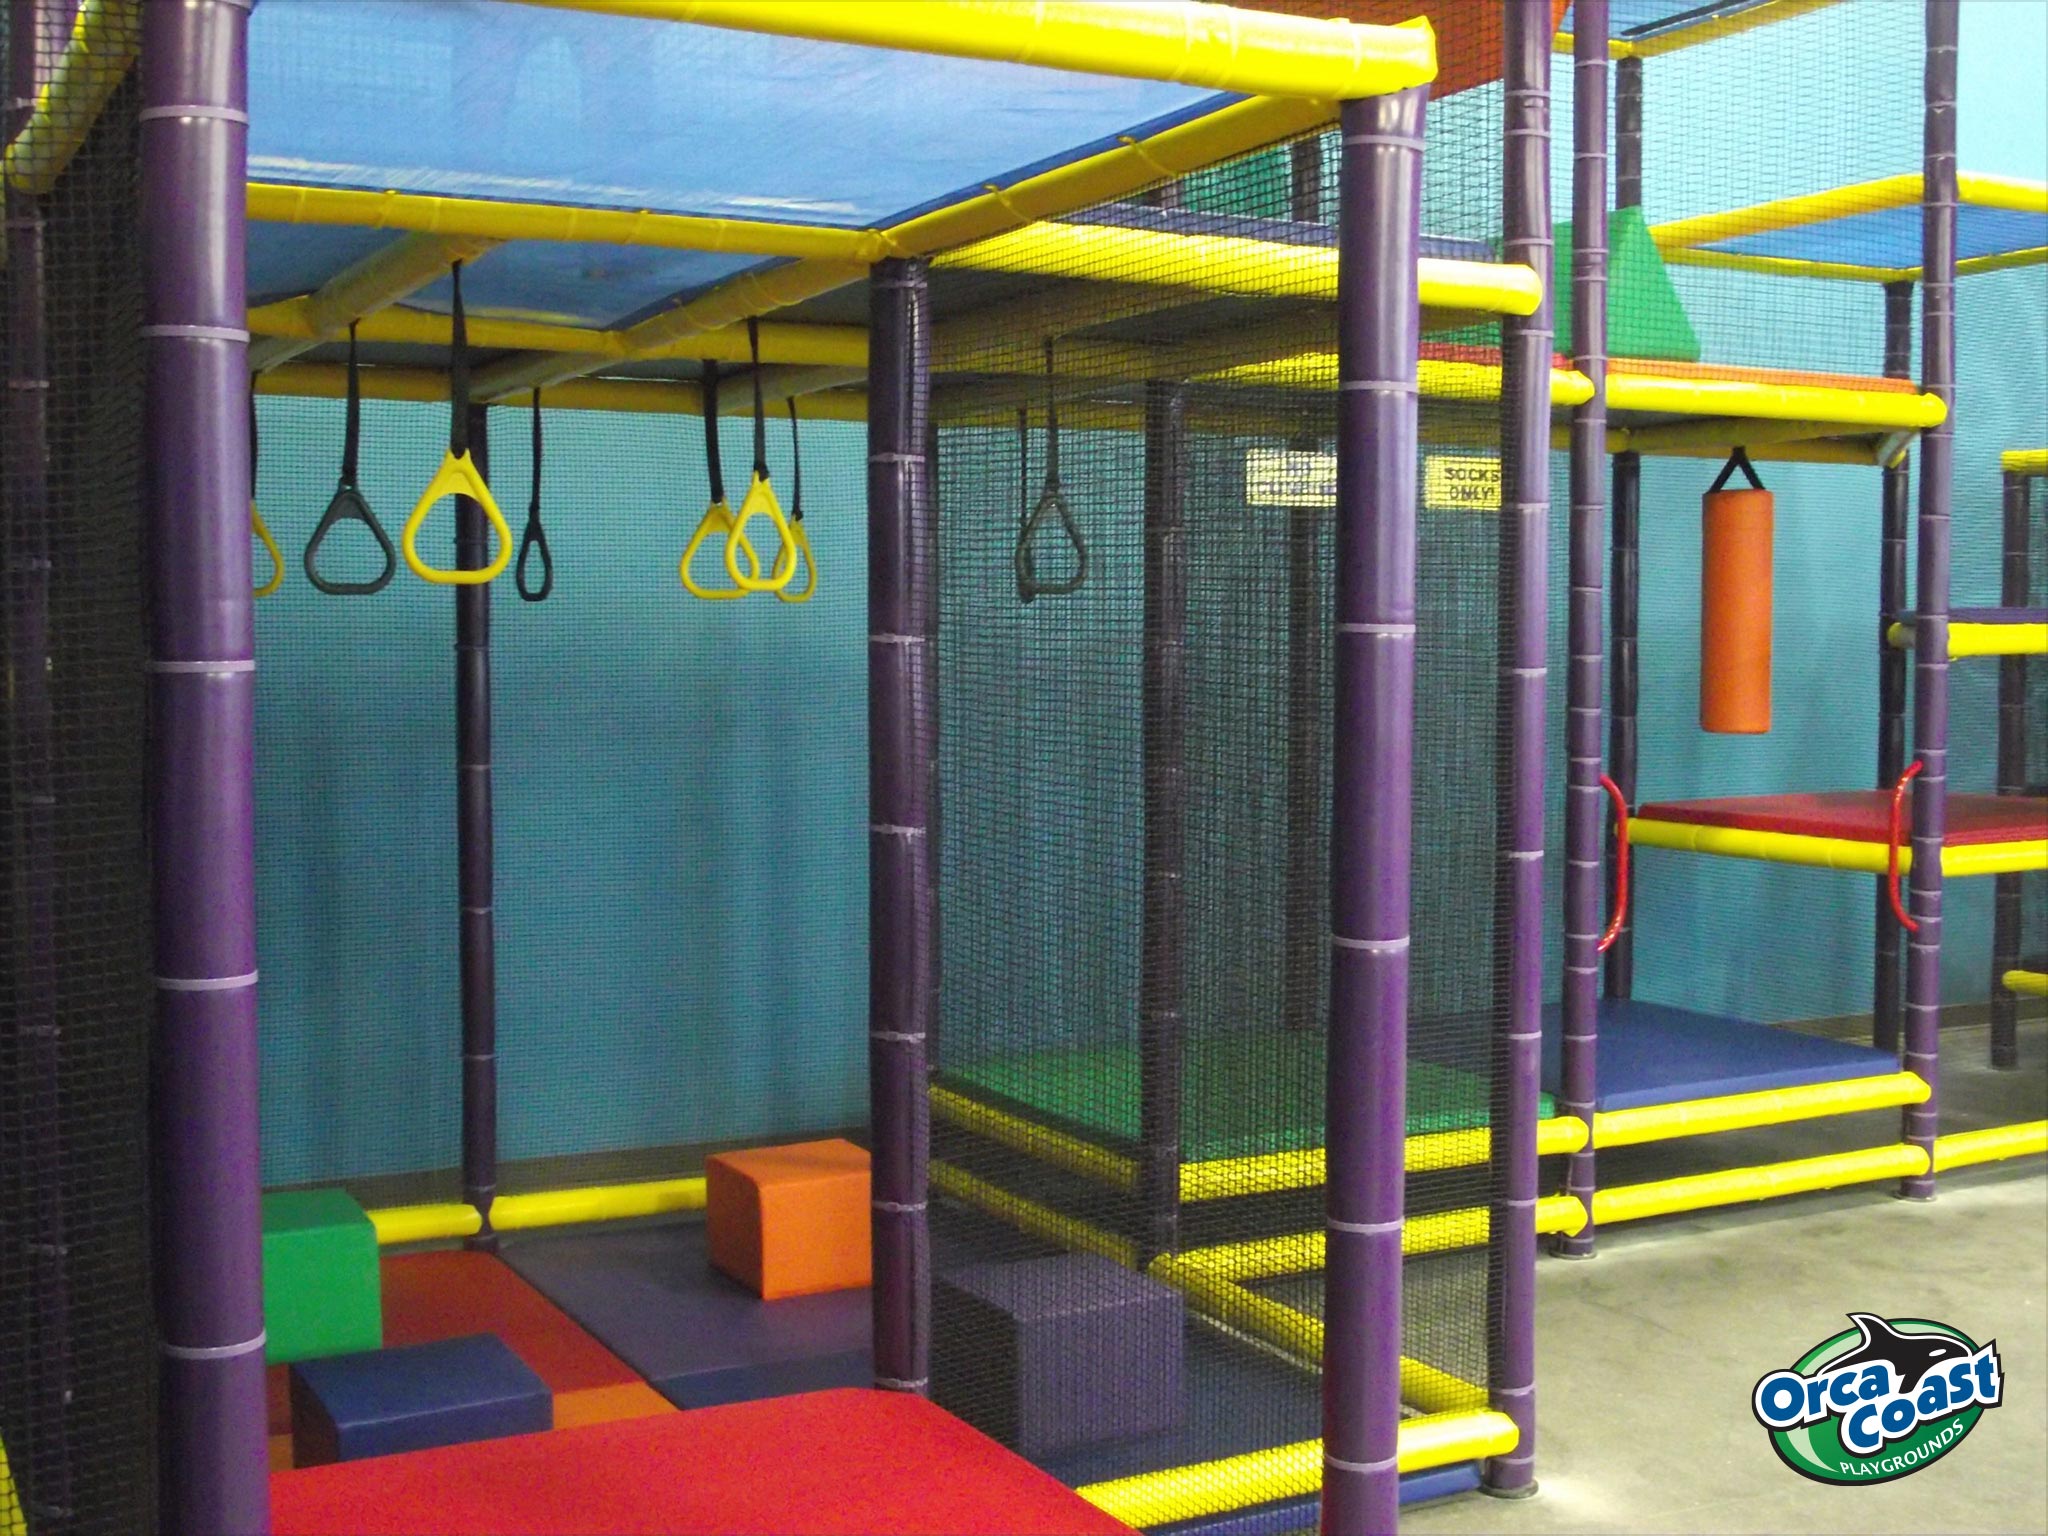 Planet Play Indoor Playground in Vaughan, ON